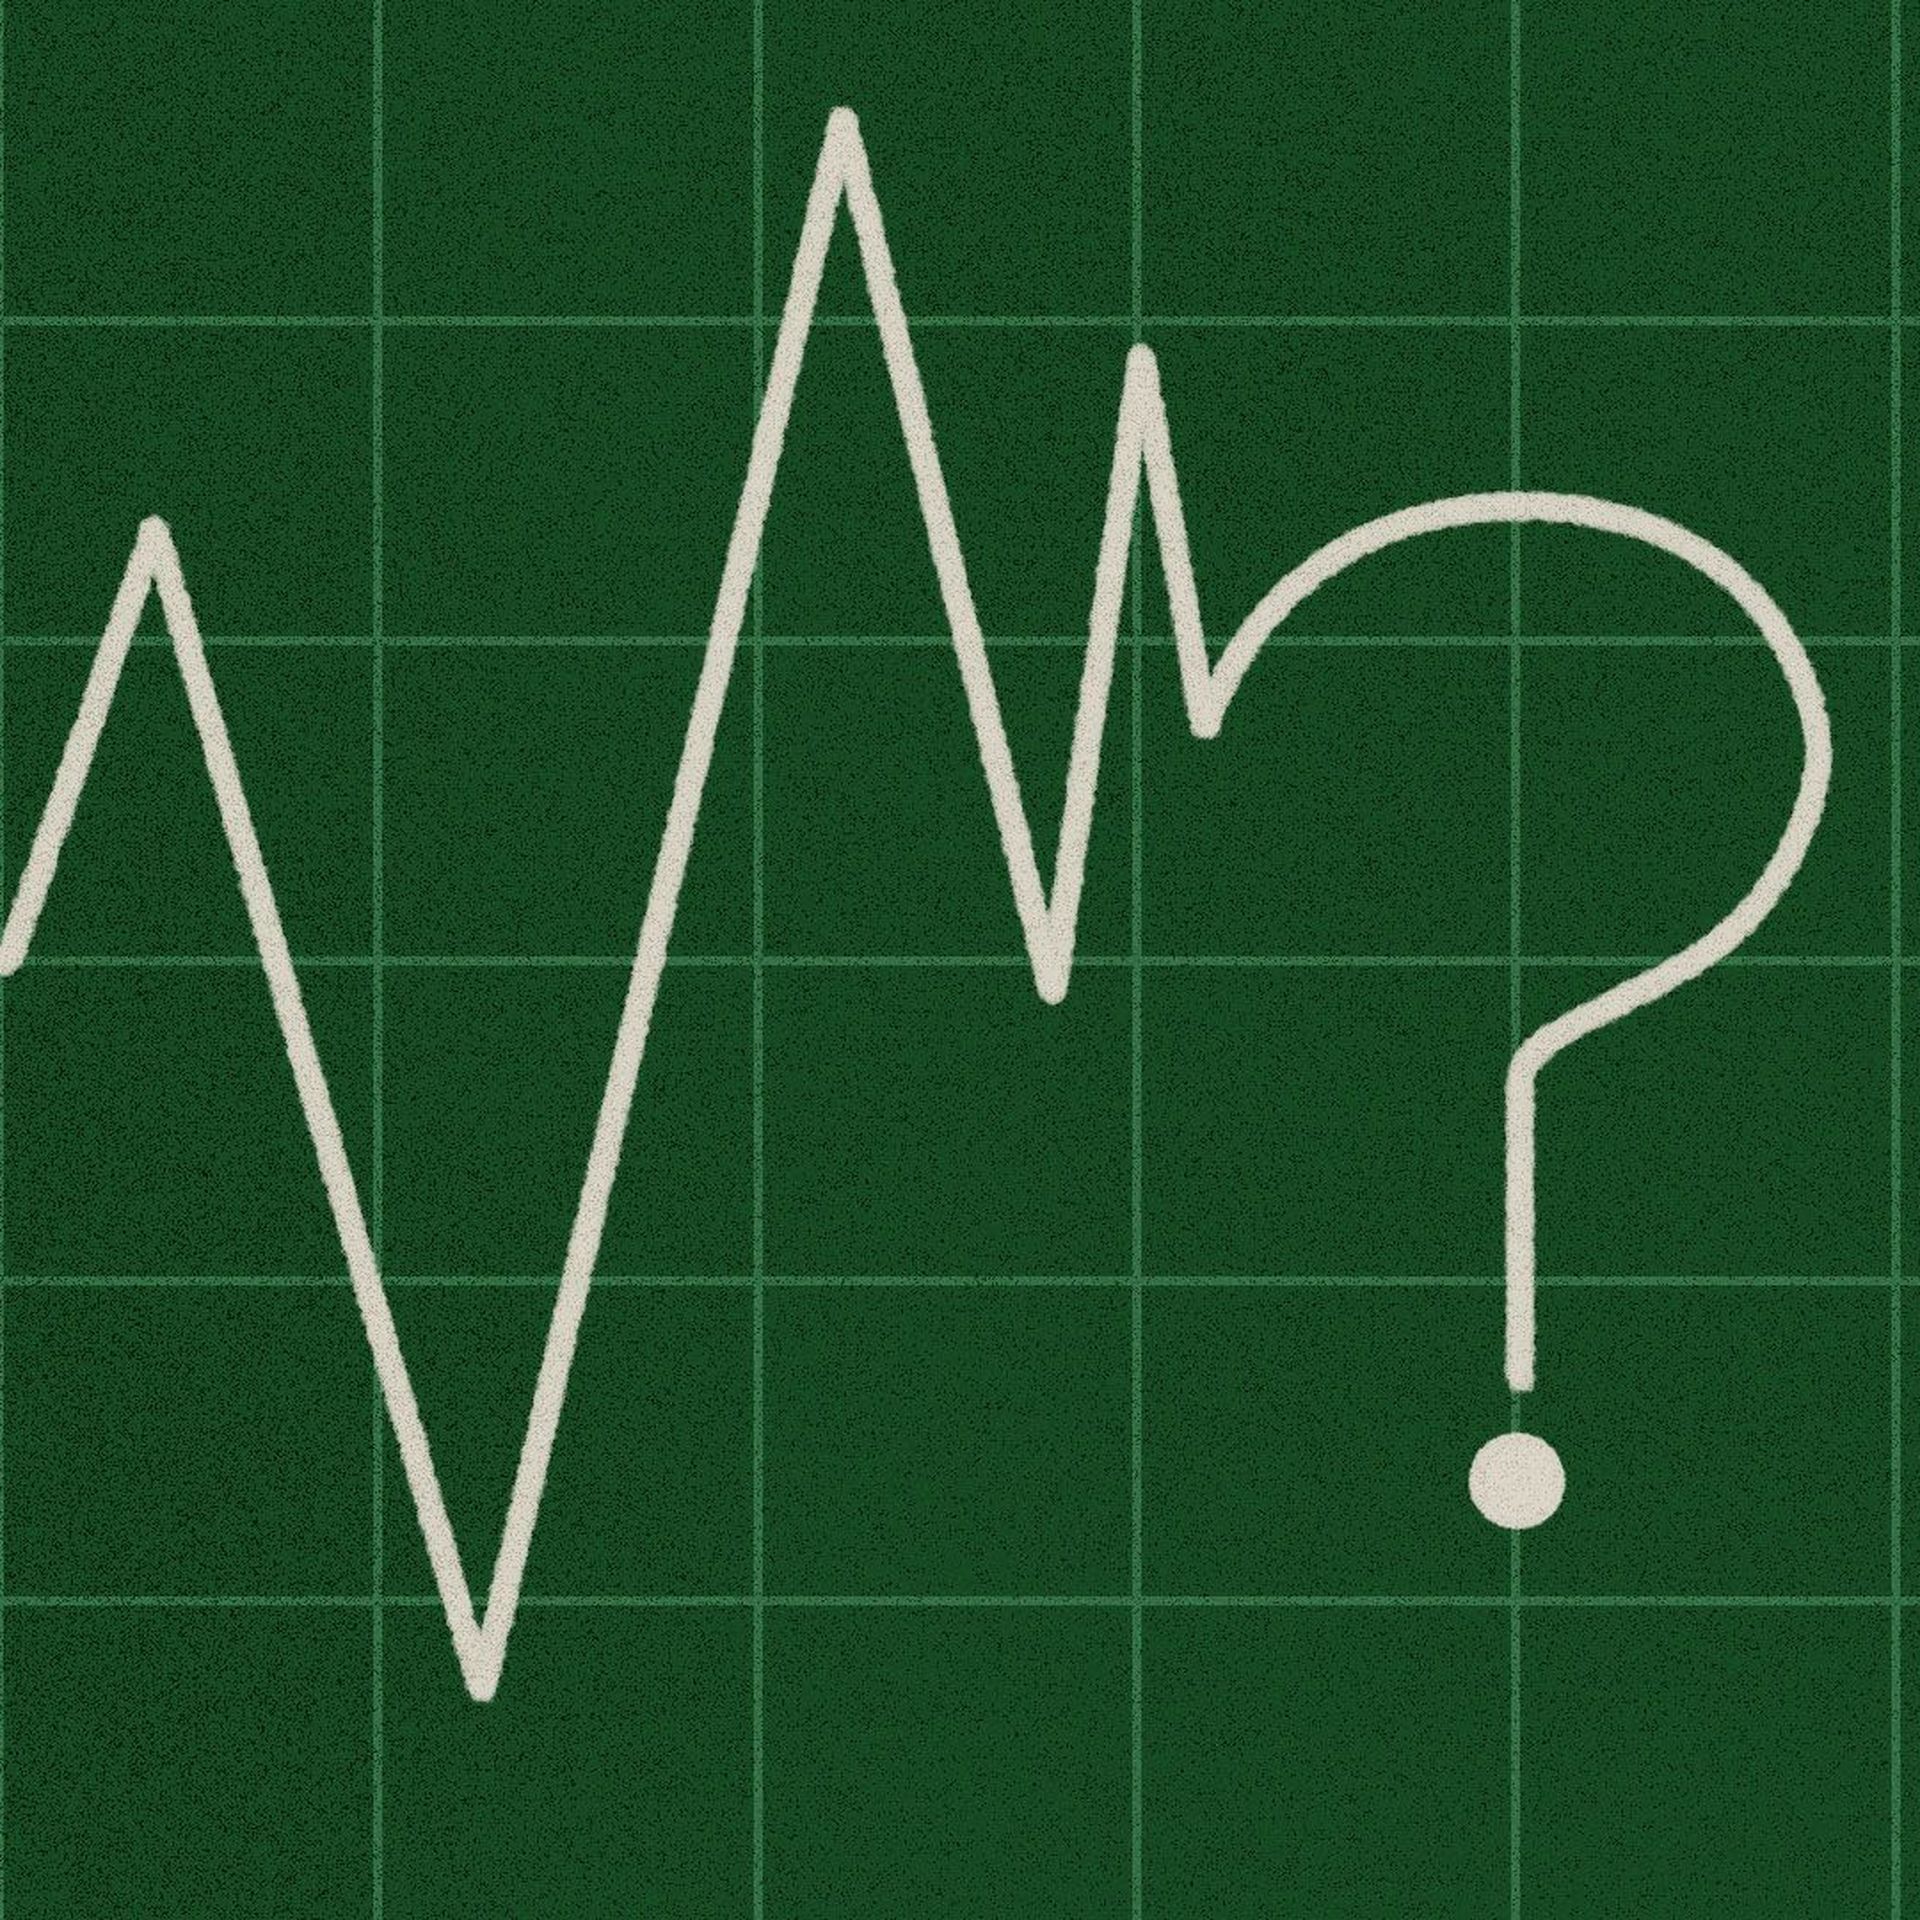 Illustration of line graph turning into a question mark